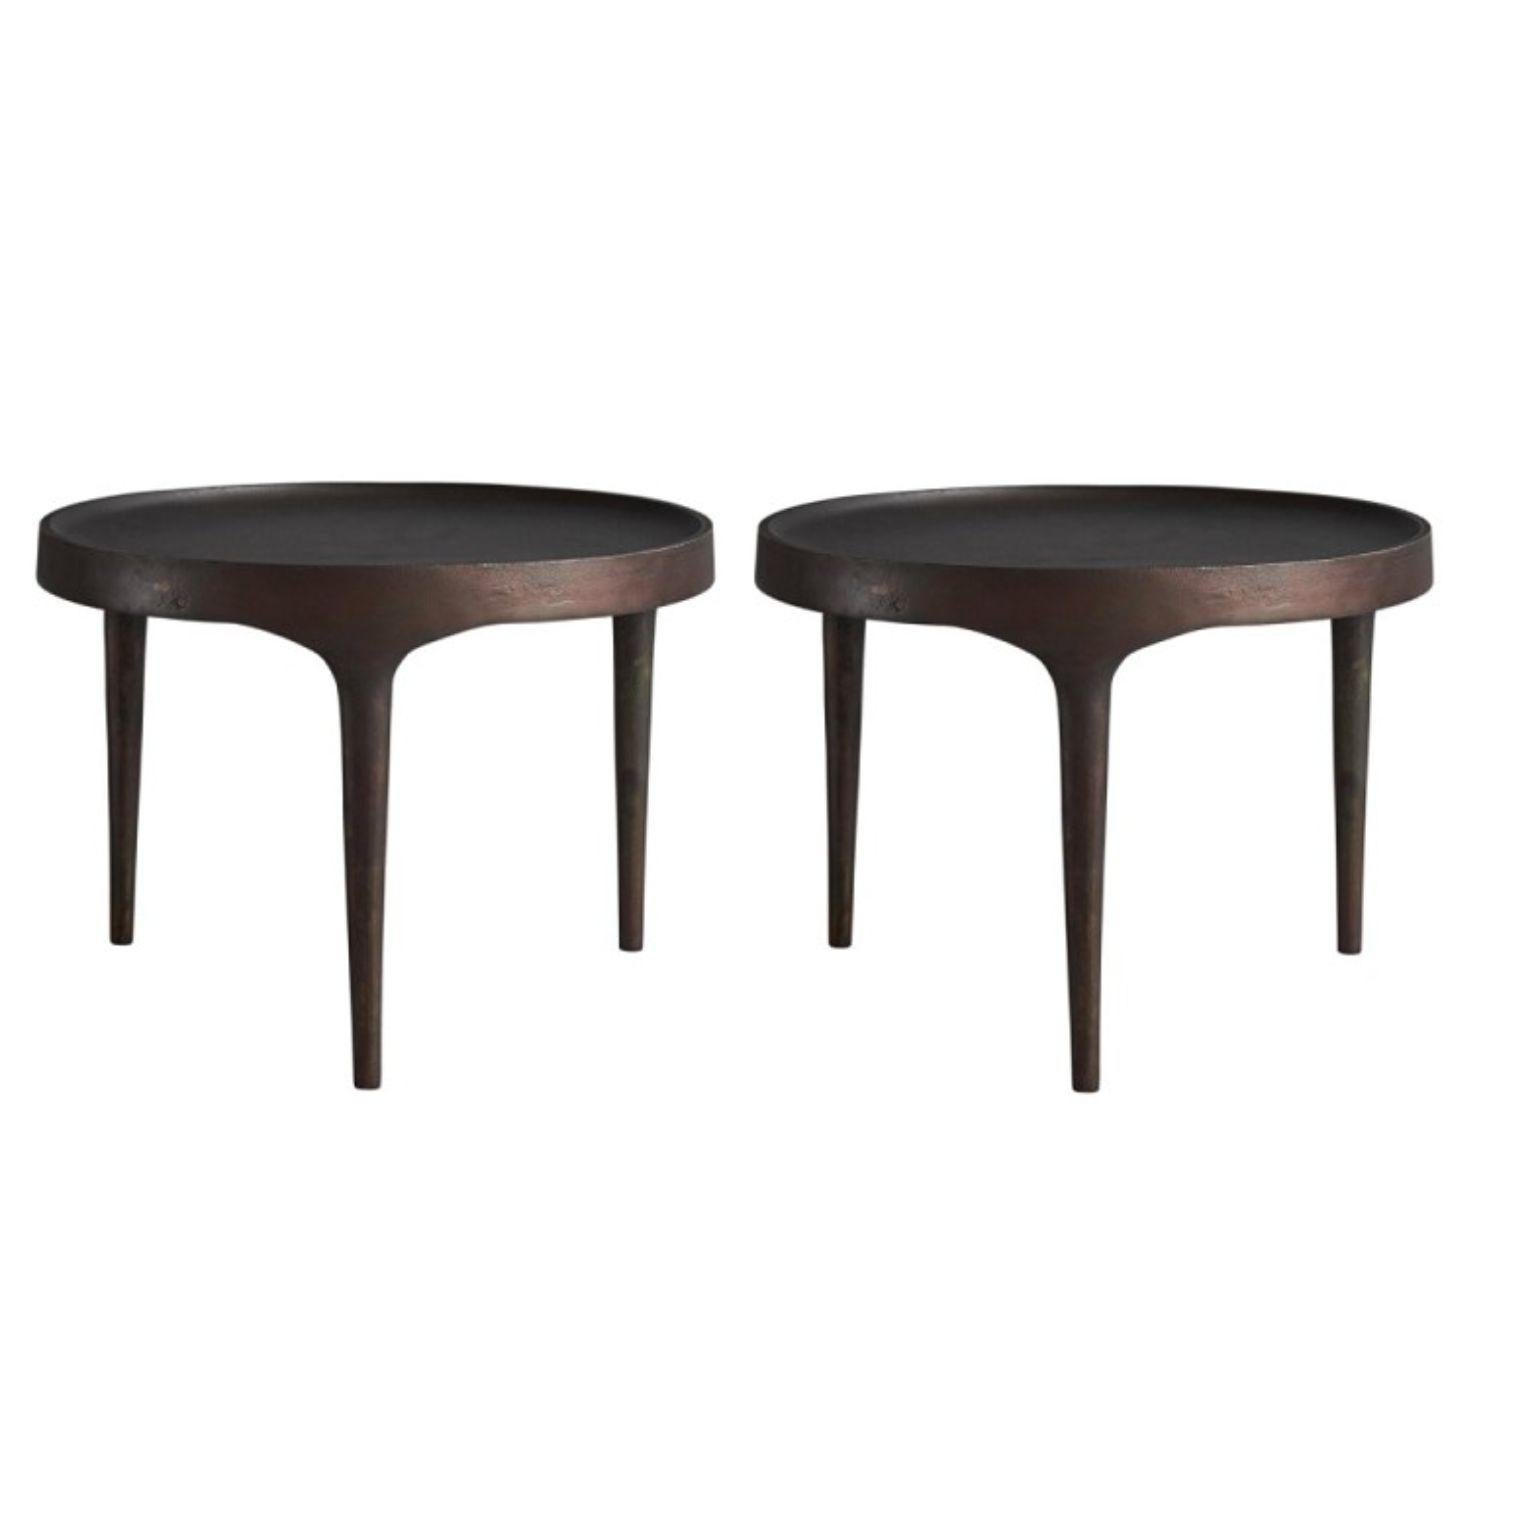 Set of 2 Phantom tables low by 101 Copenhagen
Designed by Kristian Sofus Hansen & Tommy Hyldahl
Dimensions: L 50 / W 50 /H 35 CM
Materials: Cast iron

Characterized by its intentional naive and handmade expression and raw, unpolished surface, the